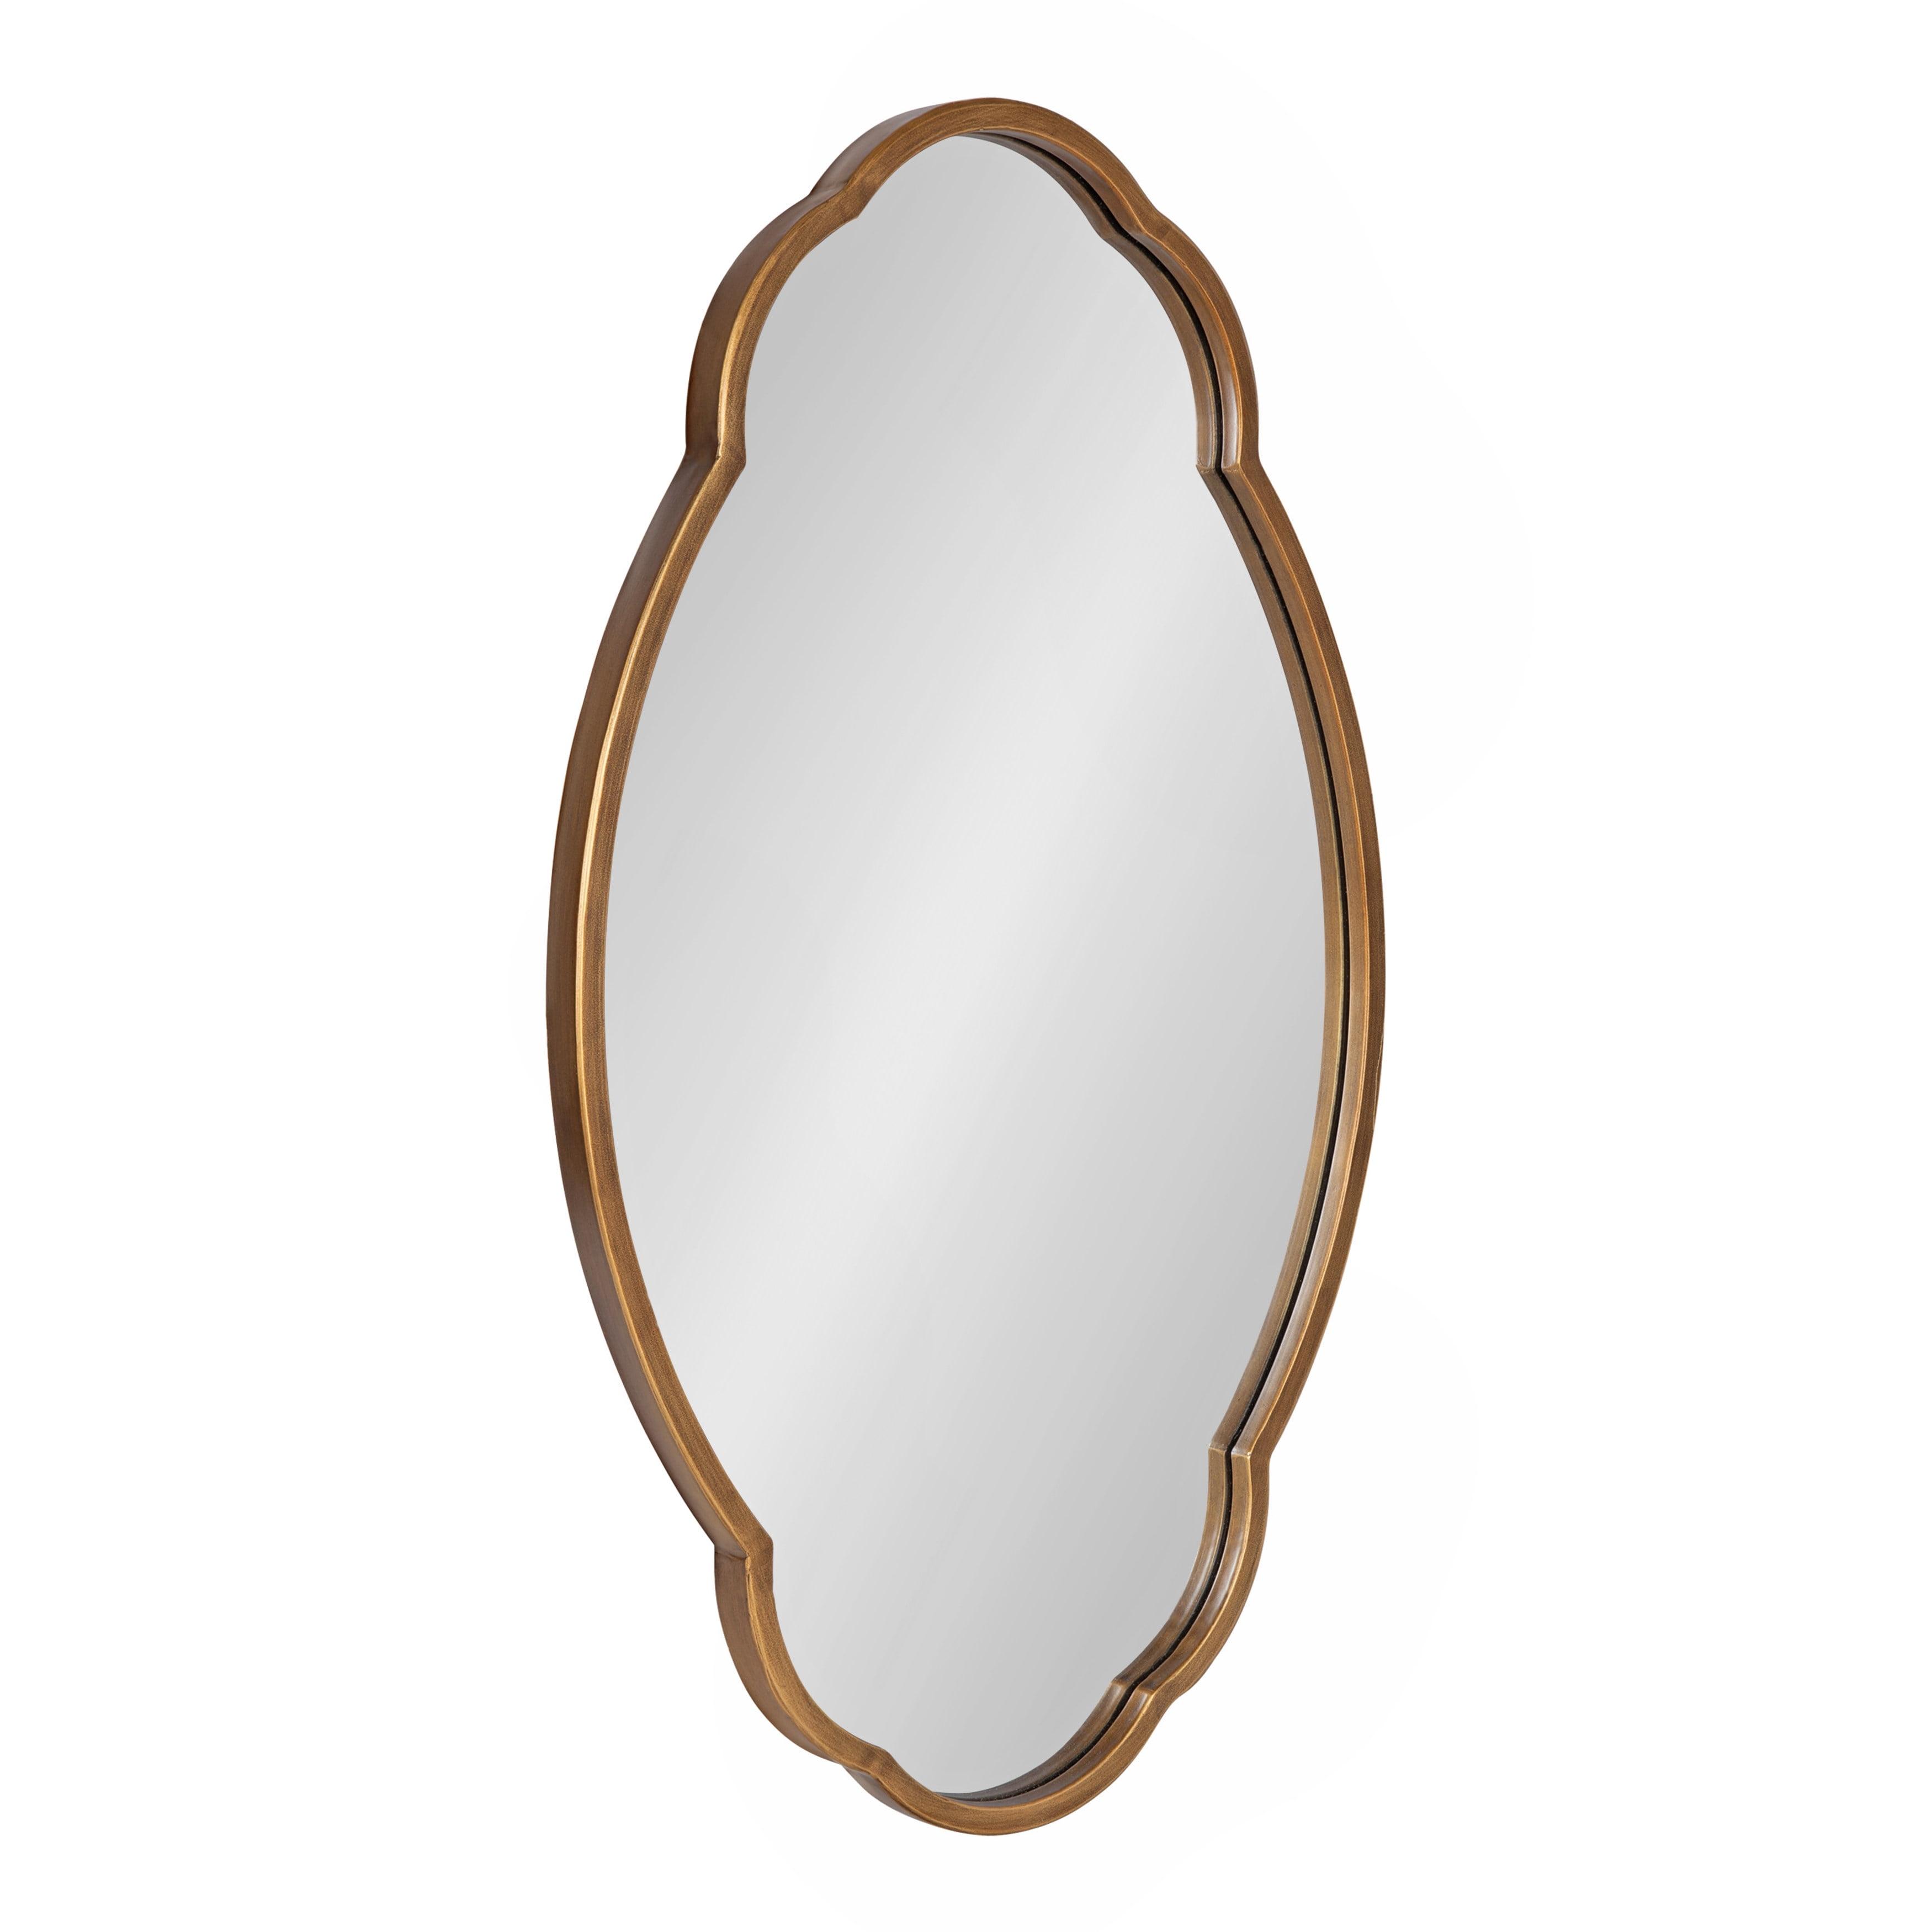 Magritte Scalloped Oval Gold Vanity Wall Mirror, 33x22 in